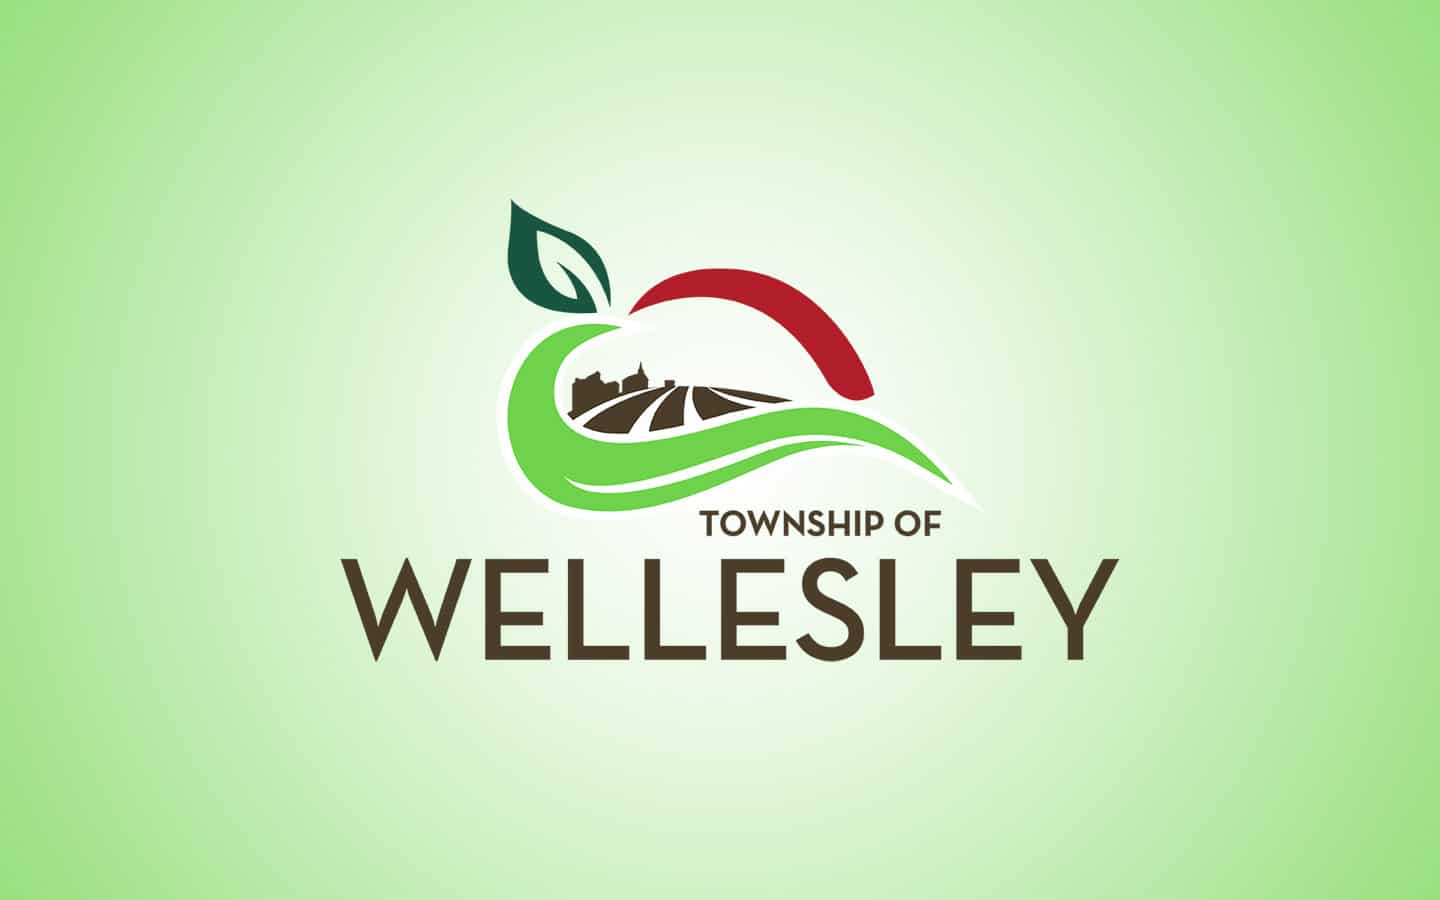                      Wellesley council declares a climate emergency                             
                     